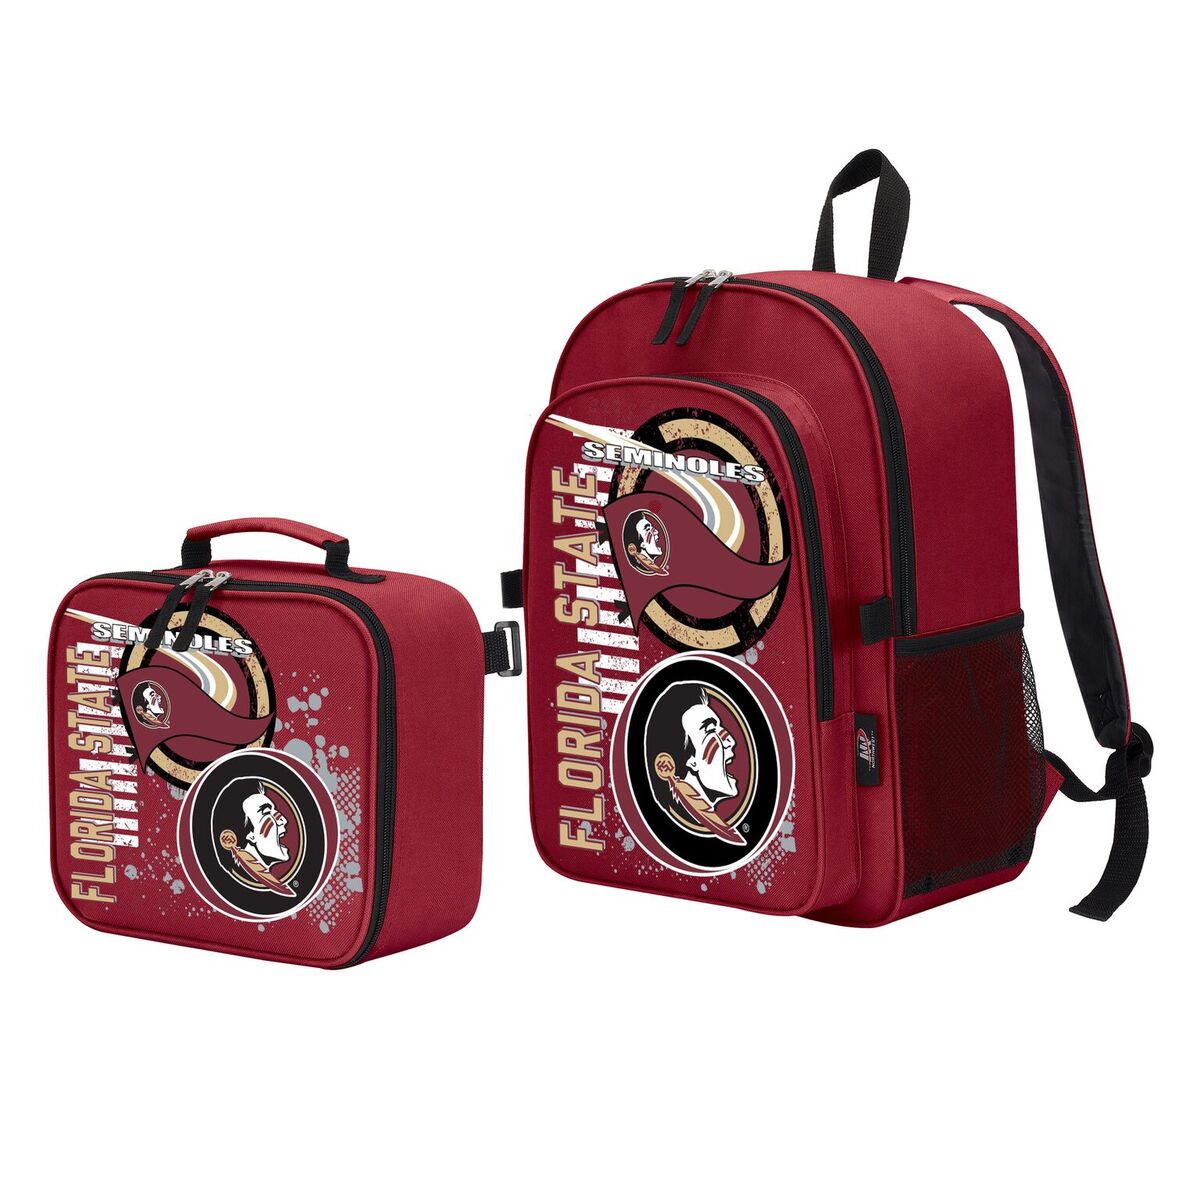 Florida State Seminoles "Accelerator" Backpack and Lunch Kit Set - image 1 of 9